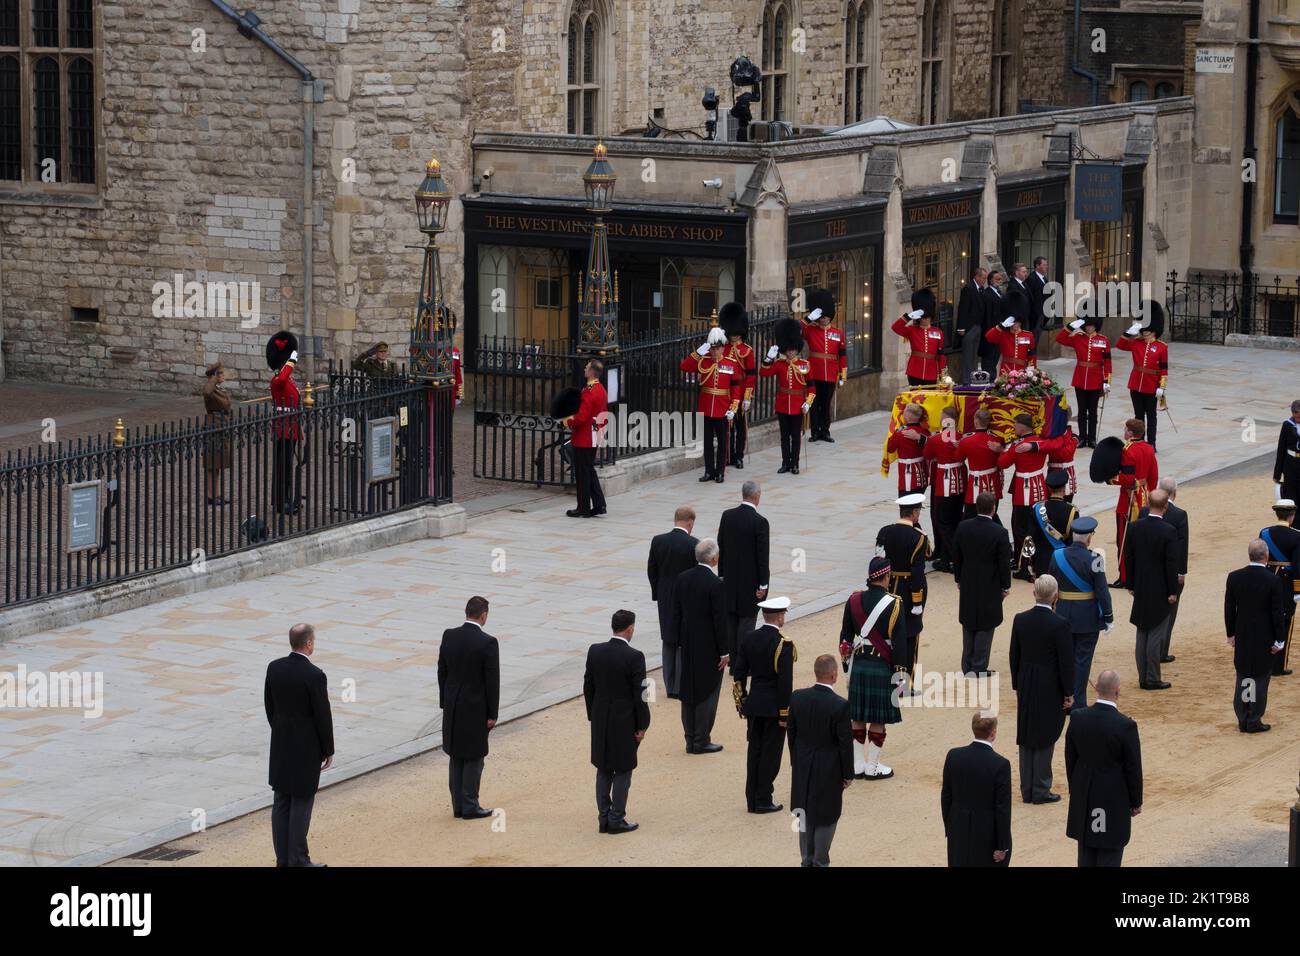 The Funeral of Queen Elizabeth 2, Westminster Abbey. Stockfoto